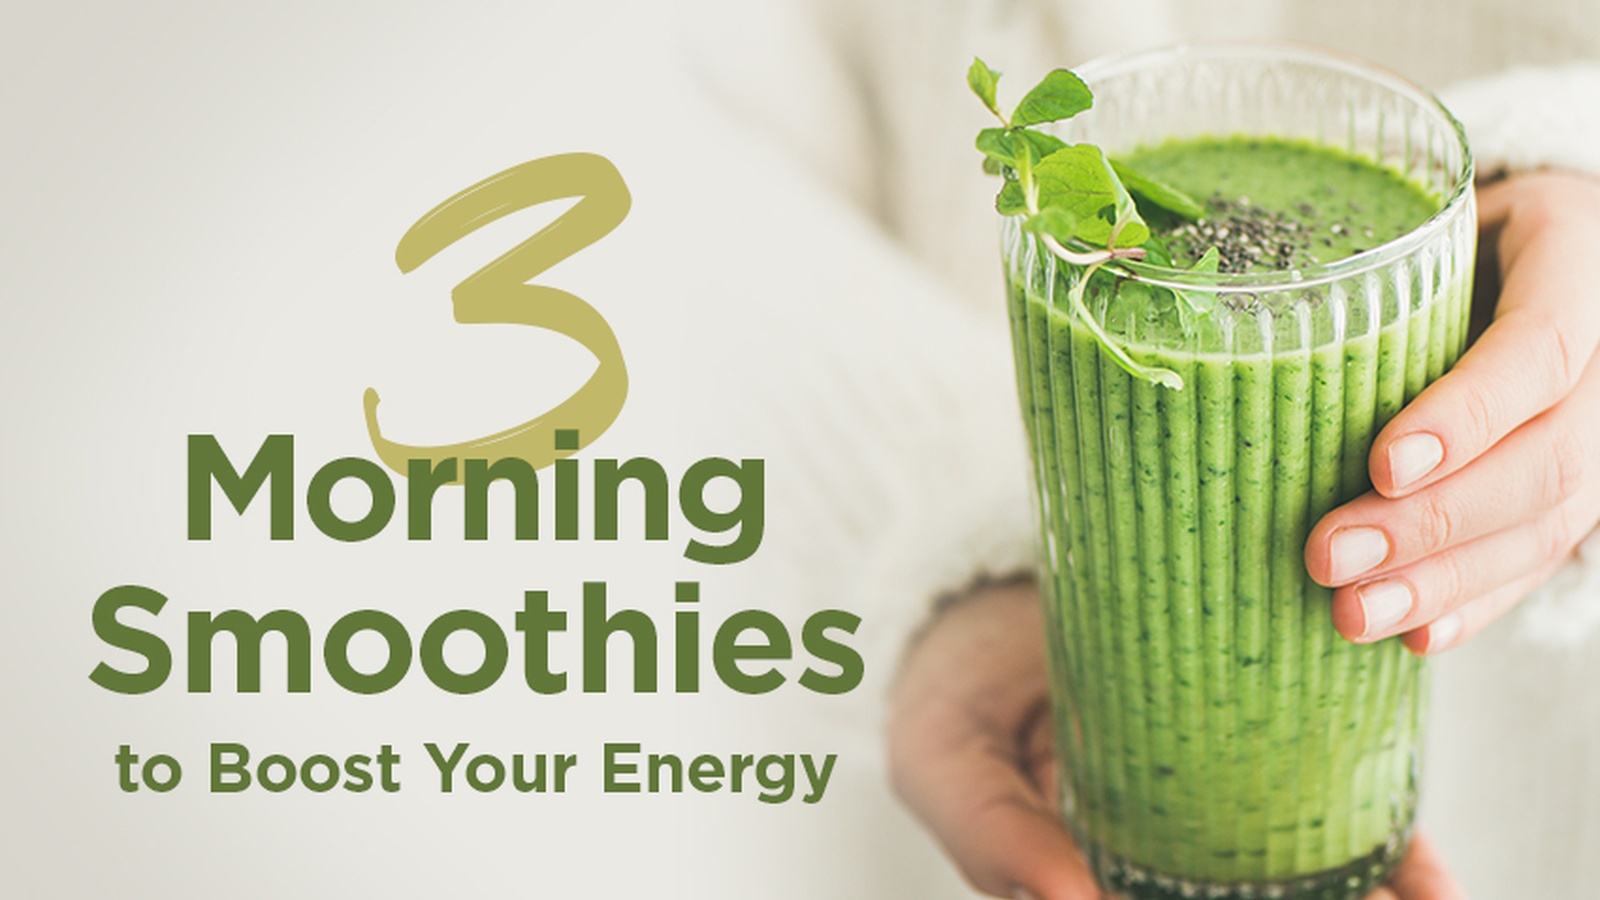 3 Morning Smoothie Recipes to Boost Your Energy!